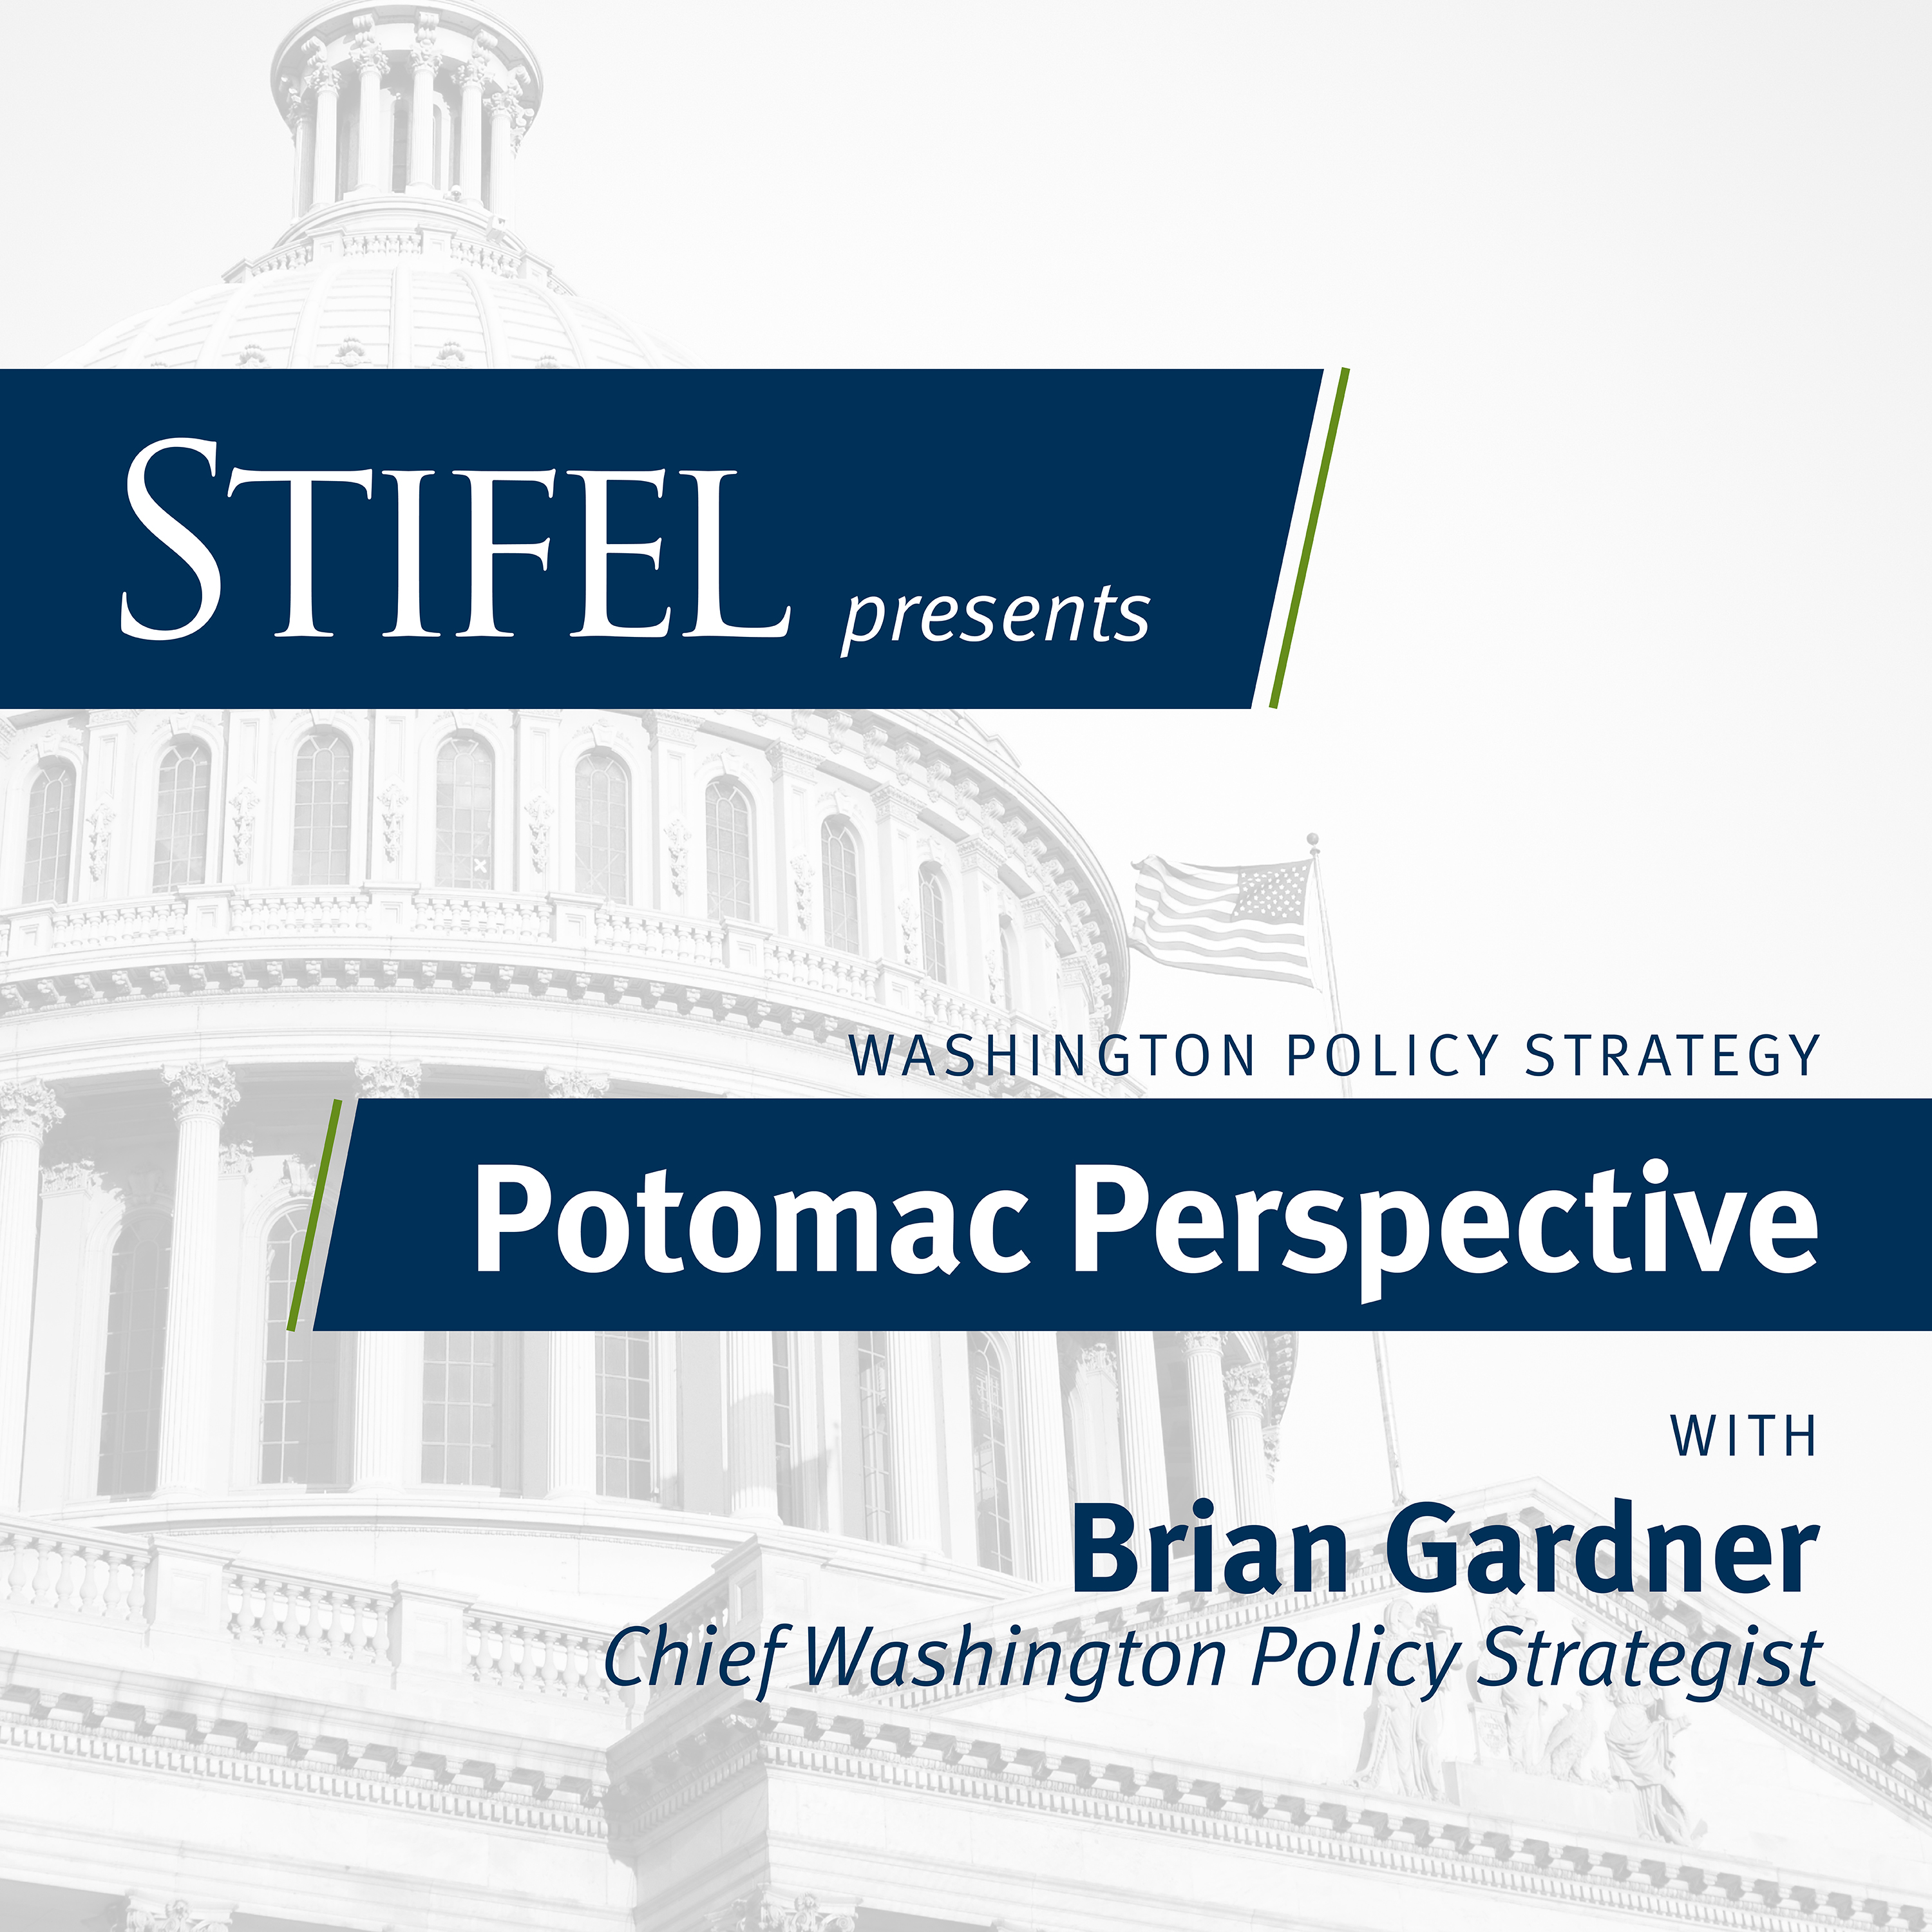 Potomac Perspective with Brian Gardner